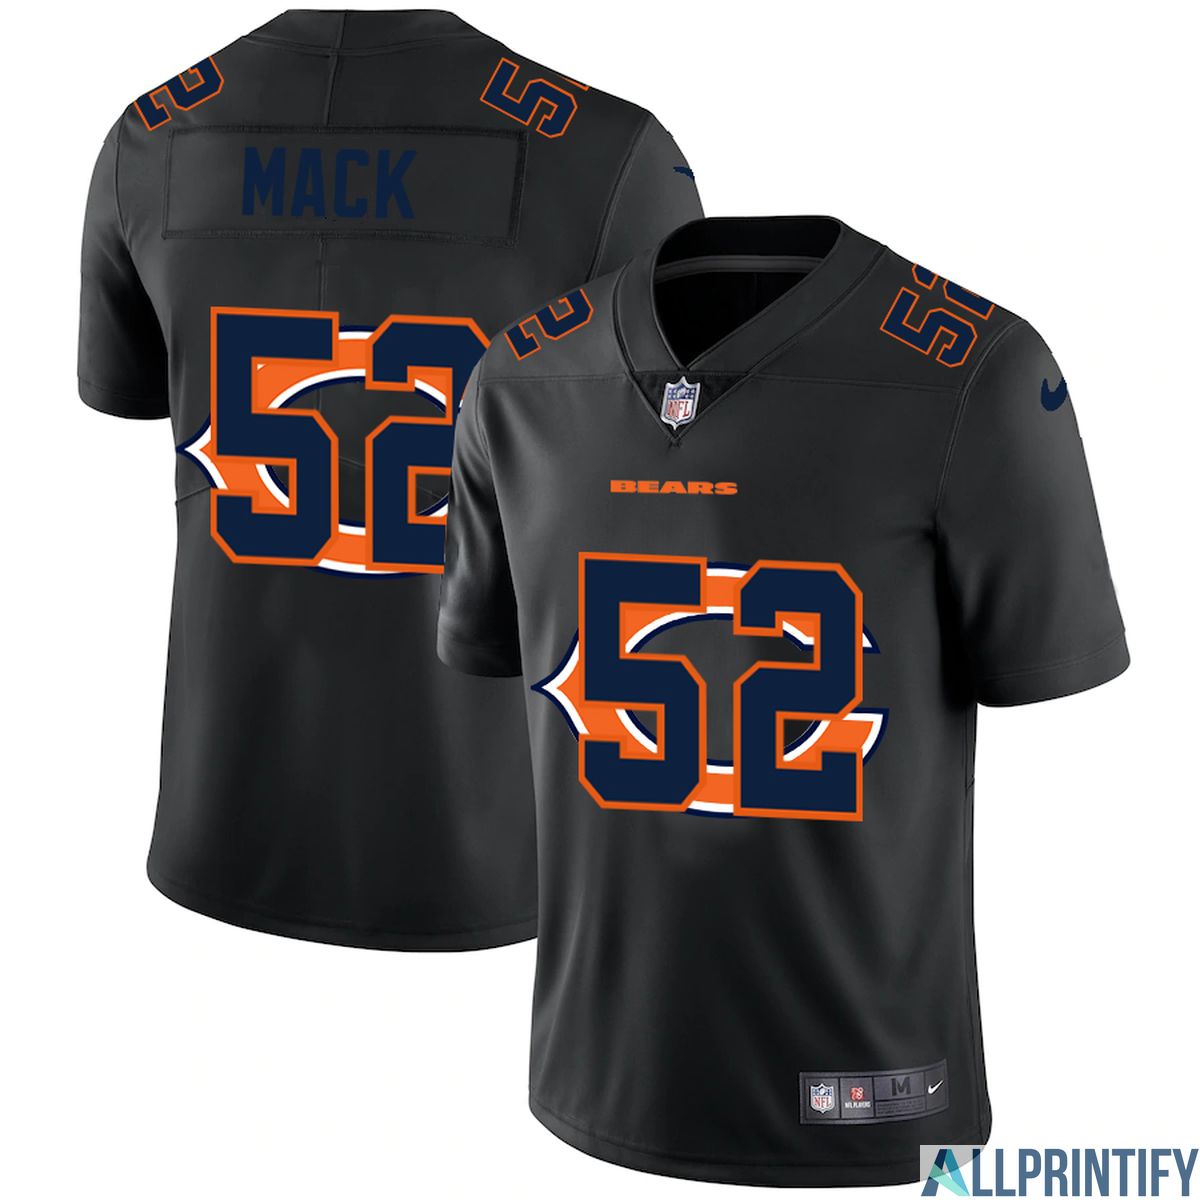 Khalil Mack Chicago Bears 52 Limited Player Jersey